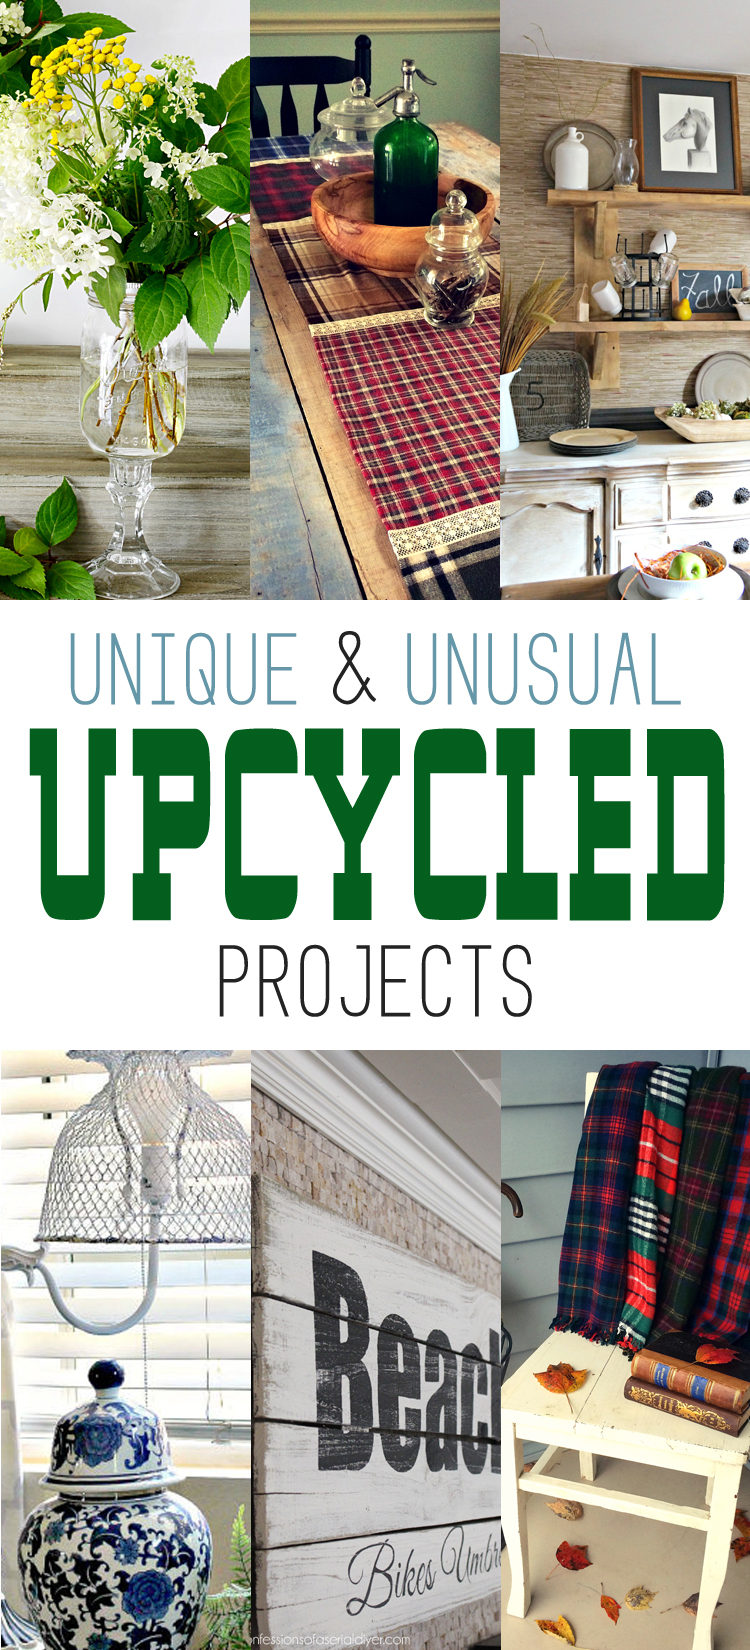 http://thecottagemarket.com/wp-content/uploads/2015/11/Upcycle-TOWER-00001.jpg